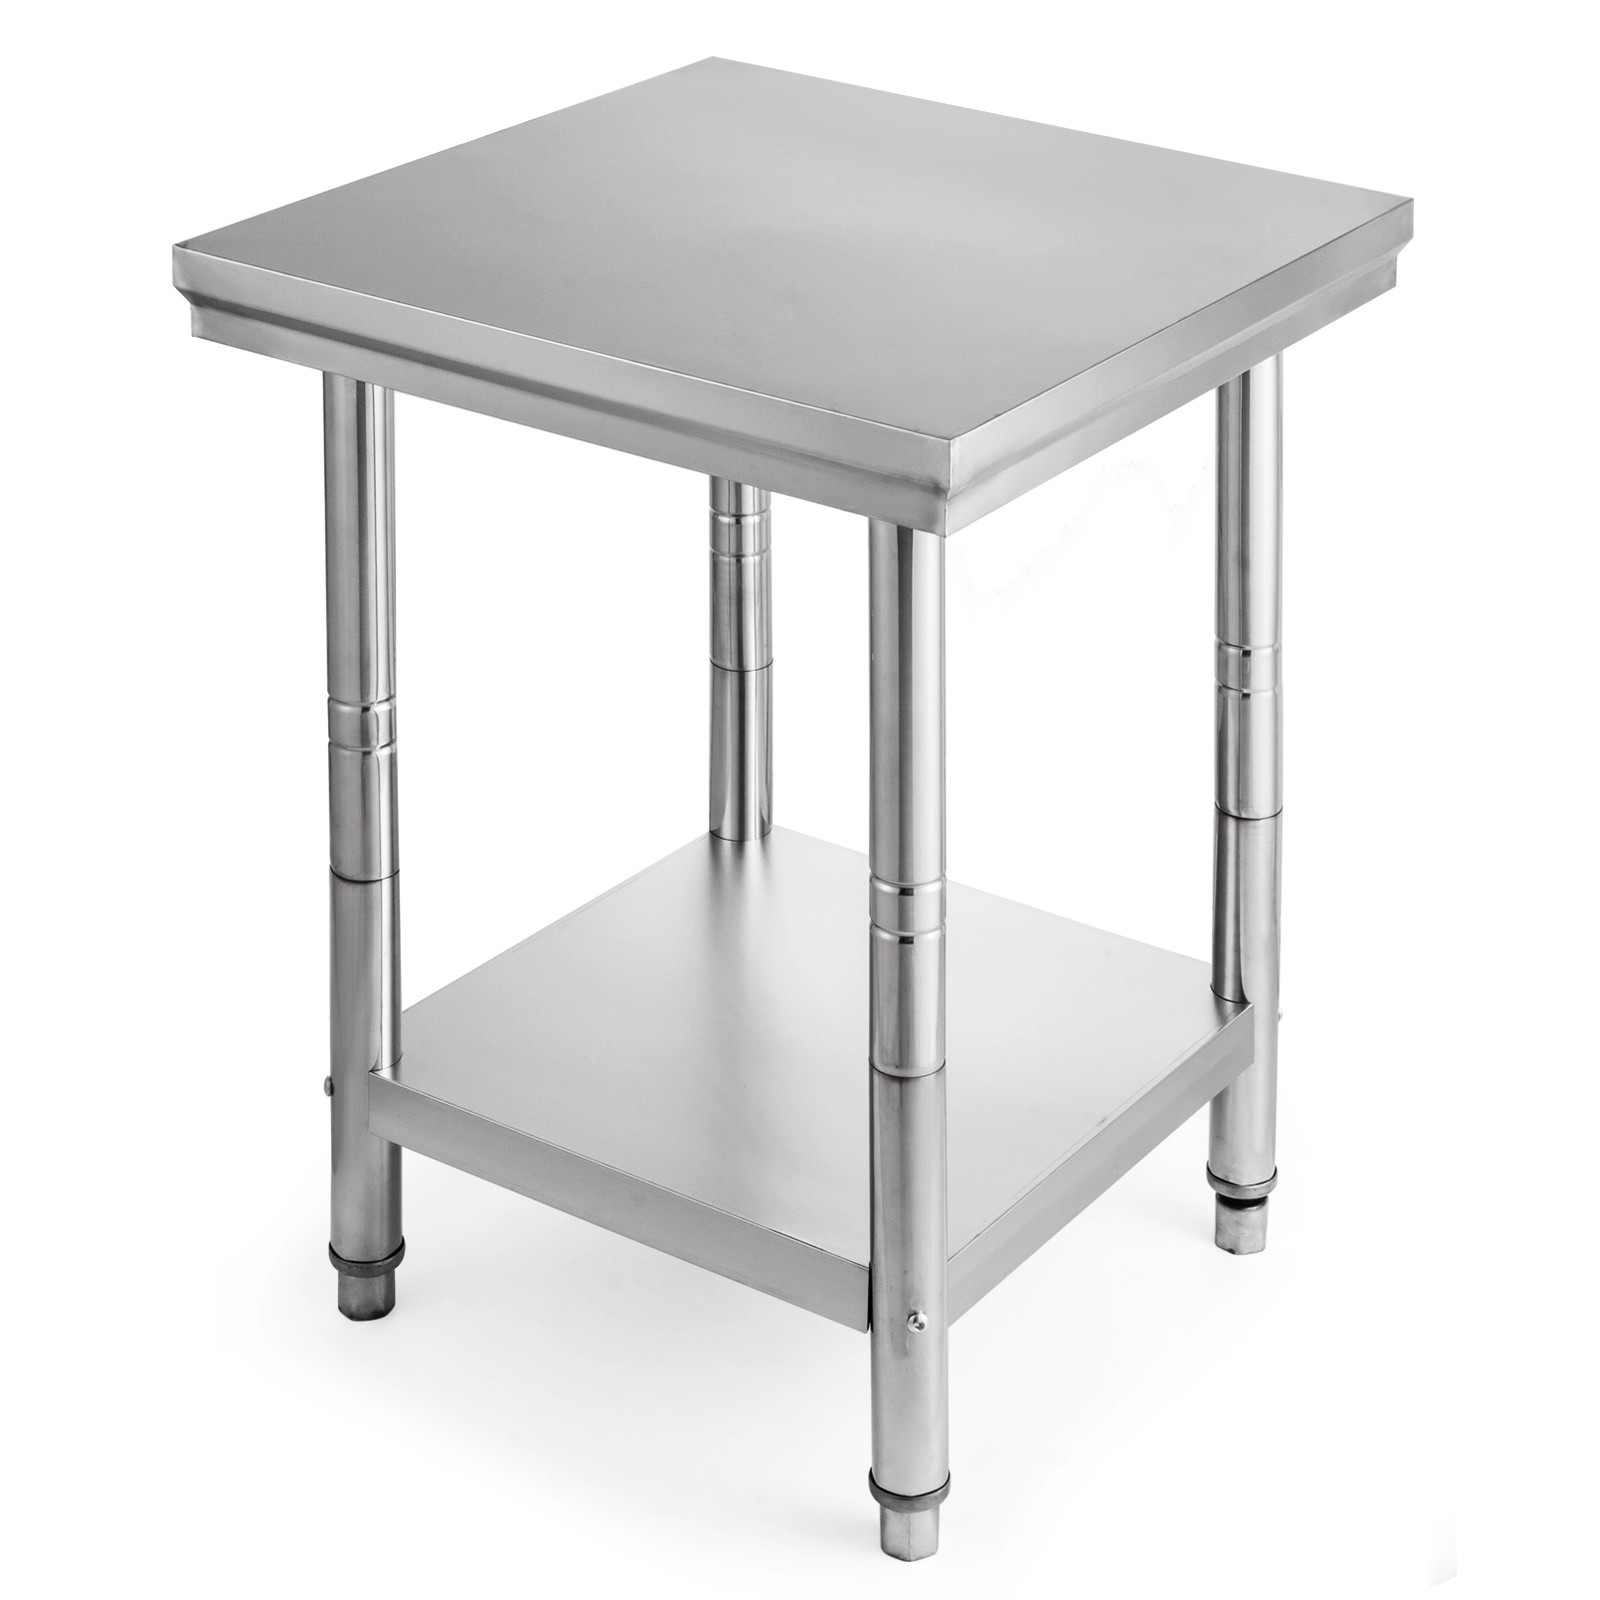 Kitchen Work Tables With Storage
 24" x 24" Stainless Steel Kitchen Work Prep Table Storage